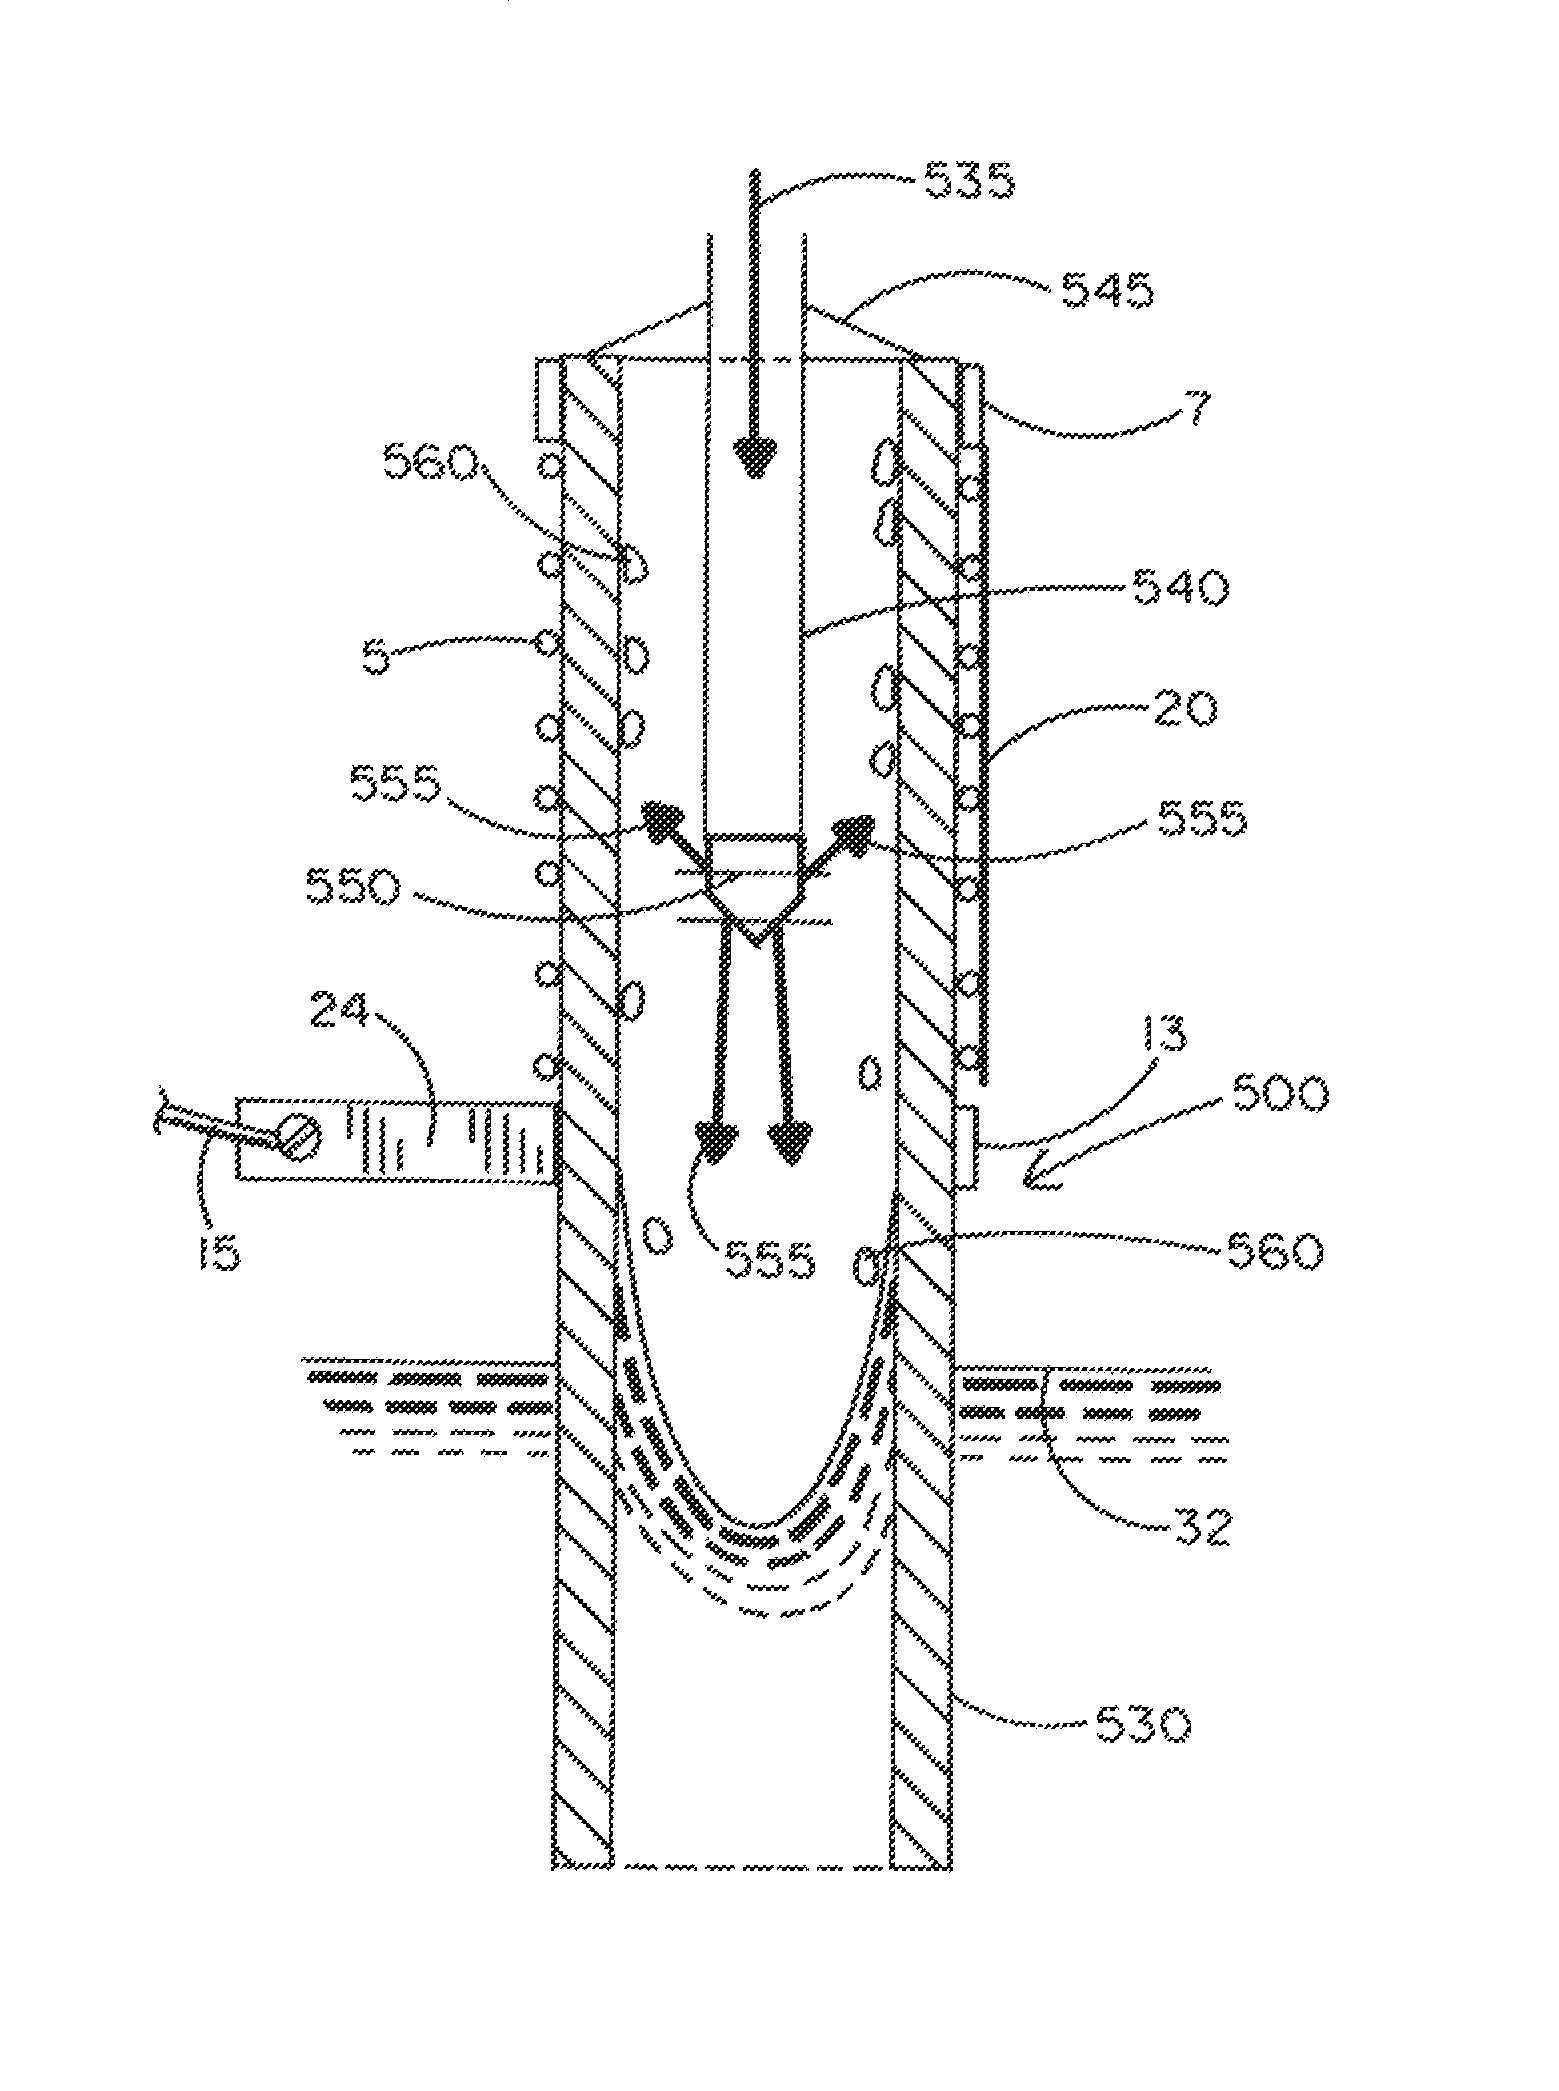 Oil transporting vaporizer for a smoke generating apparatus to detect leaks in a fluid system